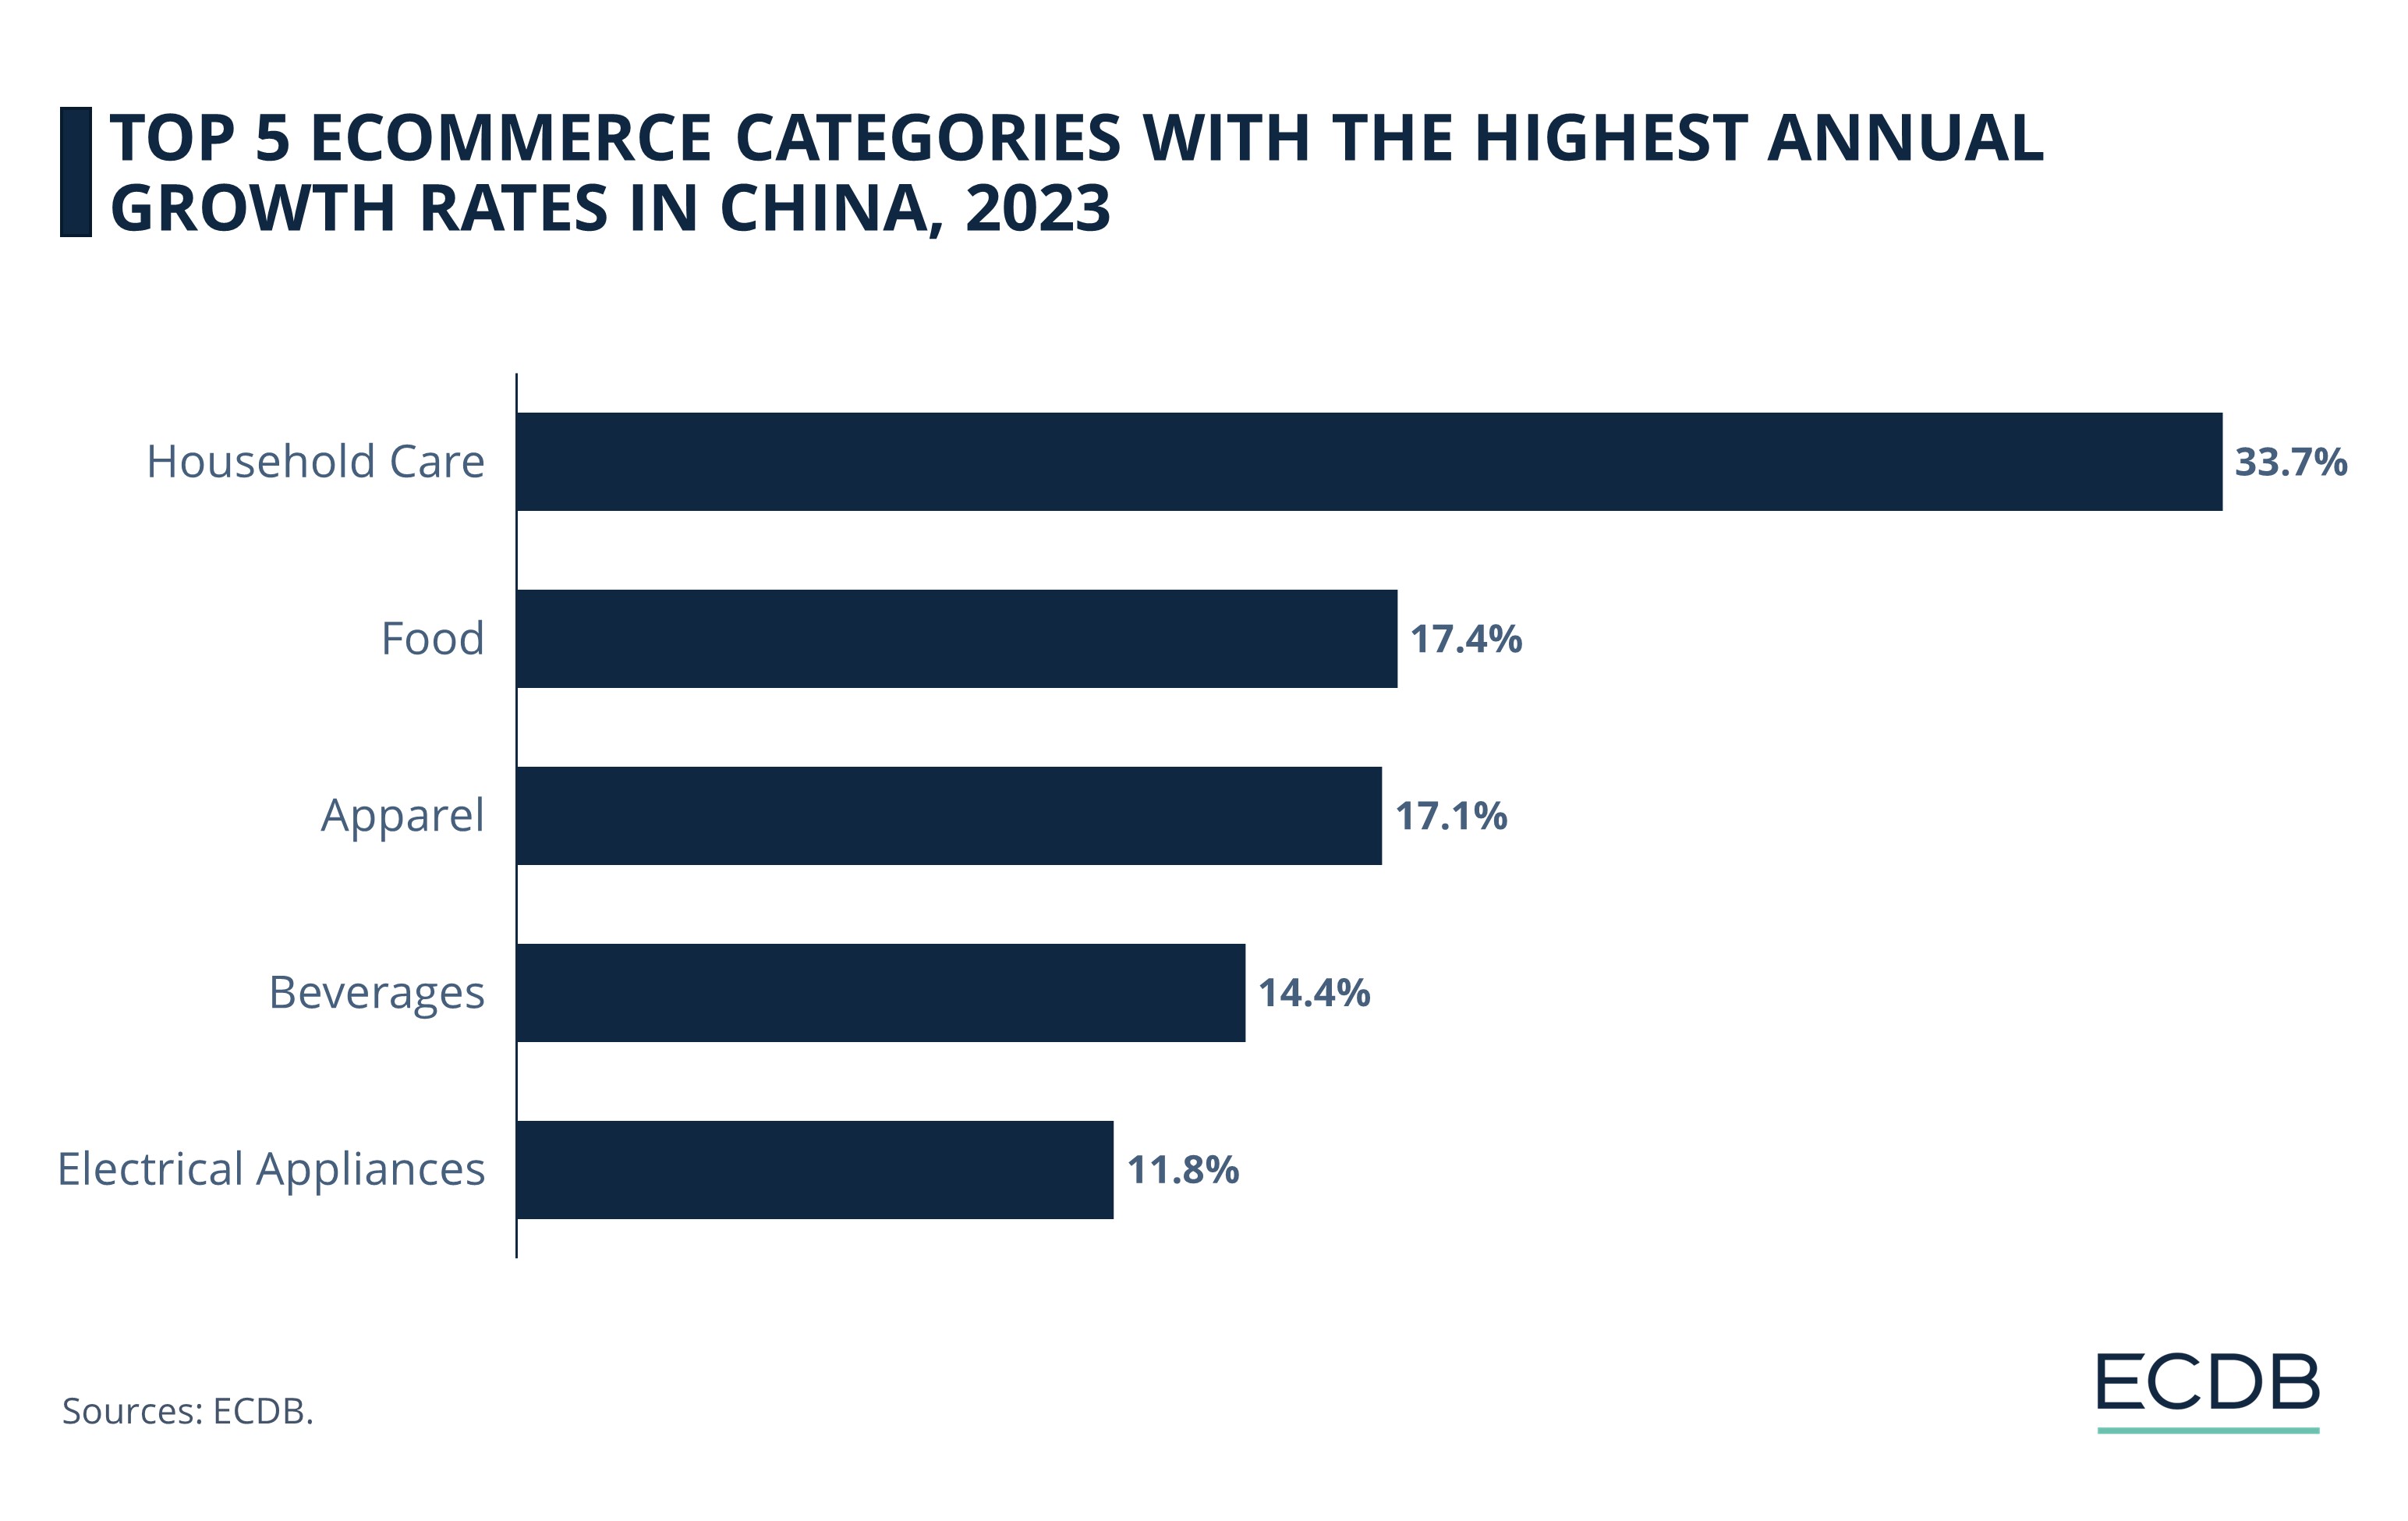 Top 5 eCommerce Categories with the Highest Annual Growth Rates in China, 2023  